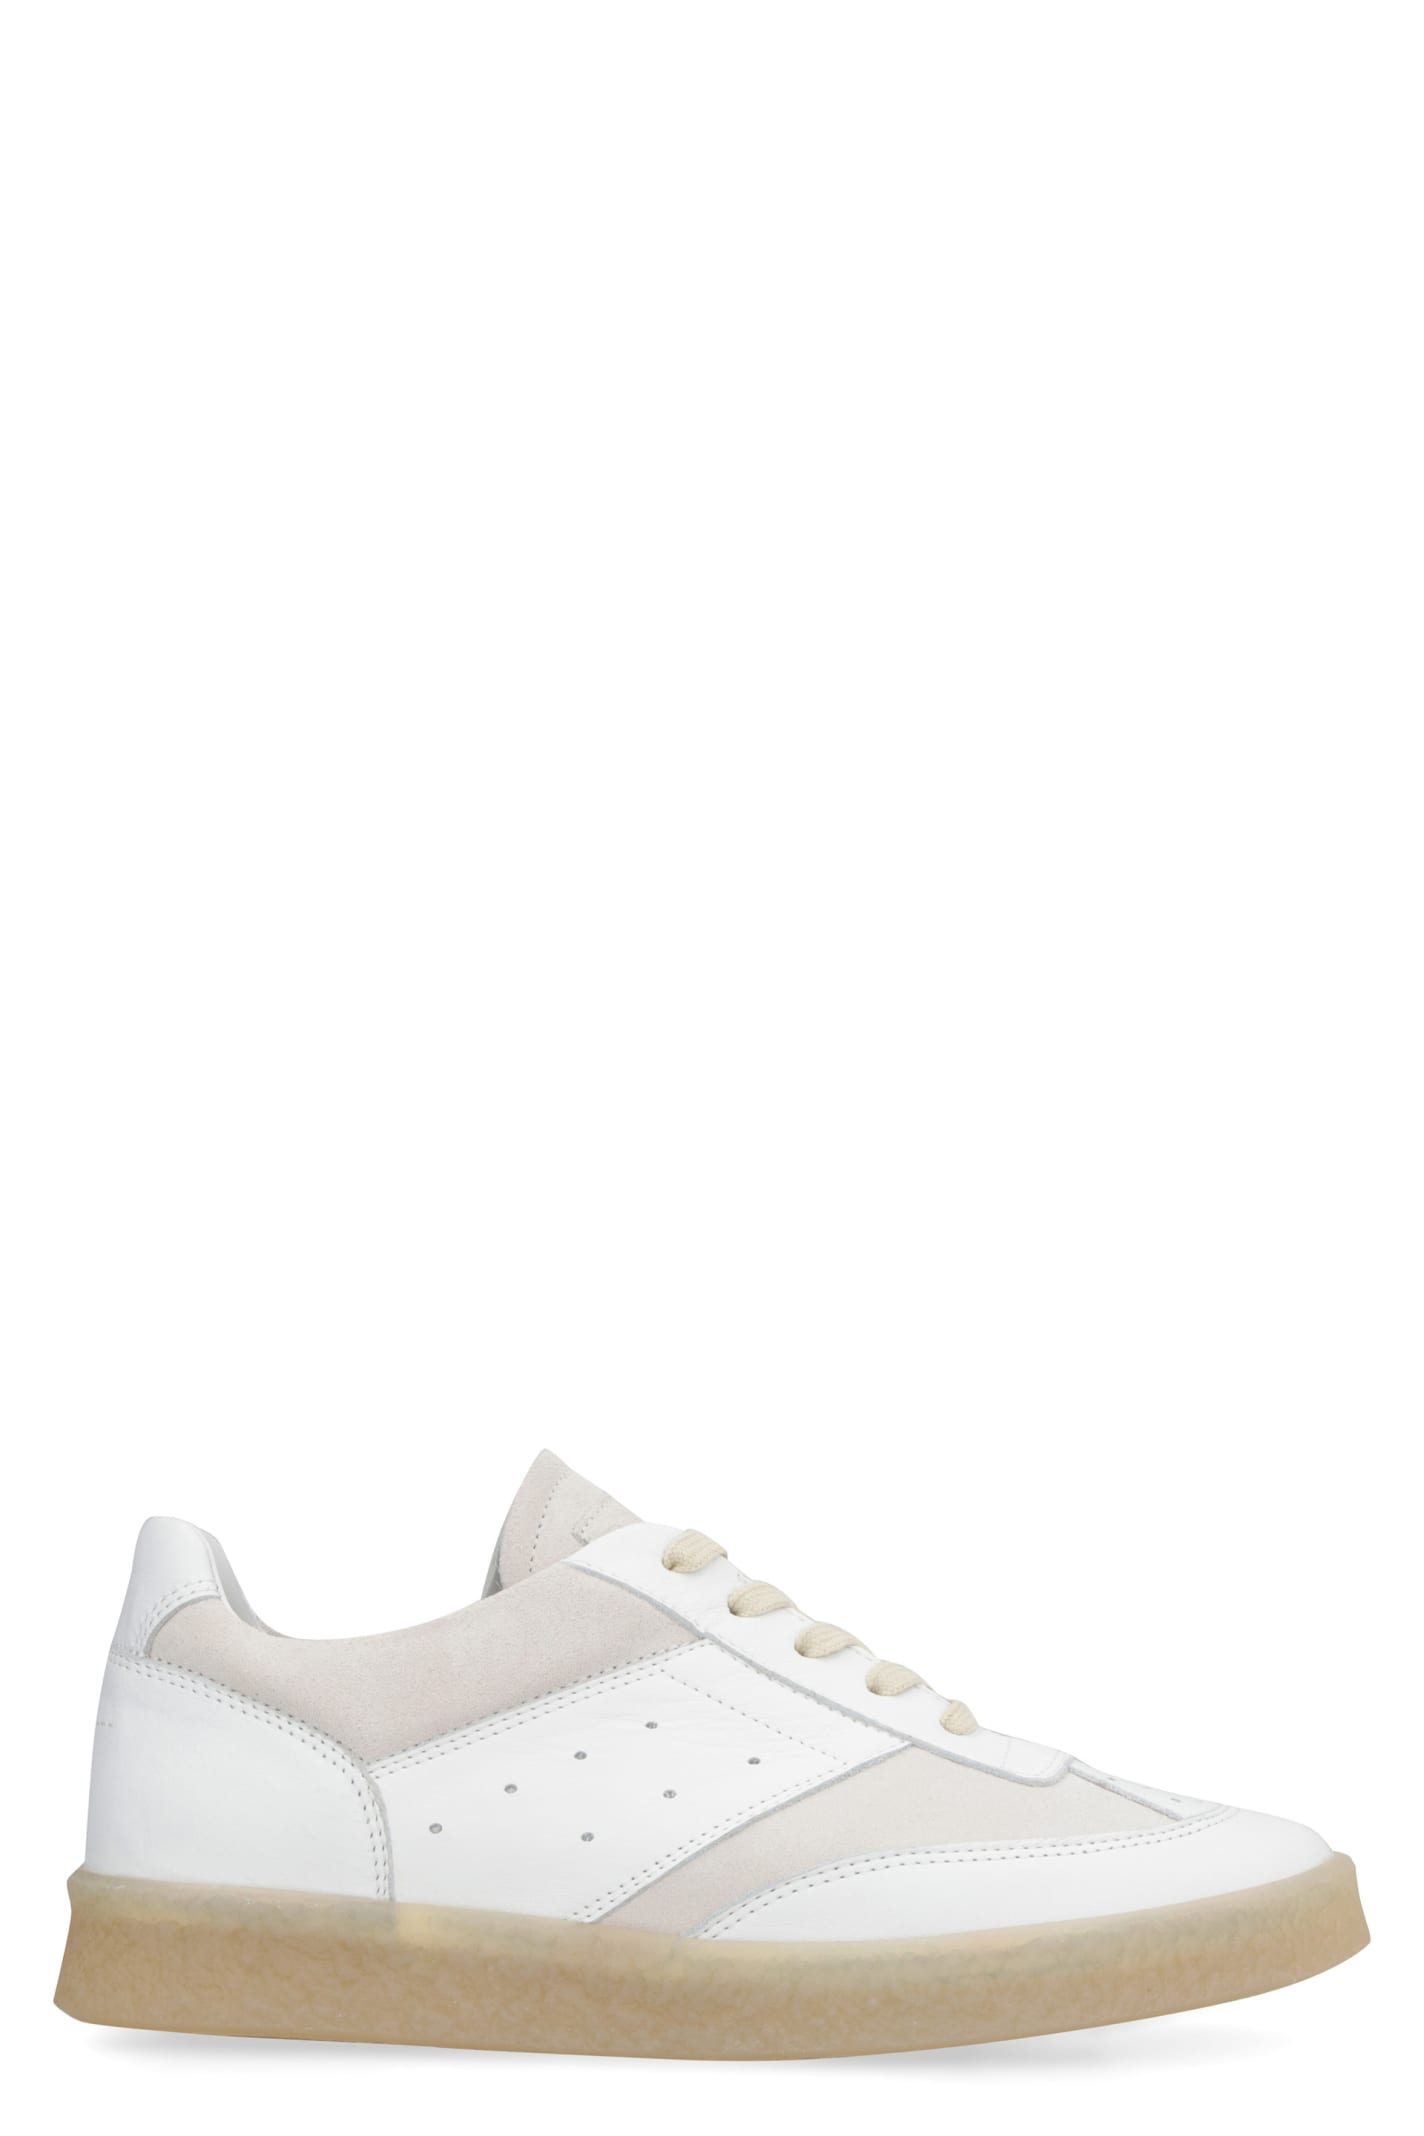 MM6 MAISON MARGIELA LEATHER LOW-TOP SNEAKERS